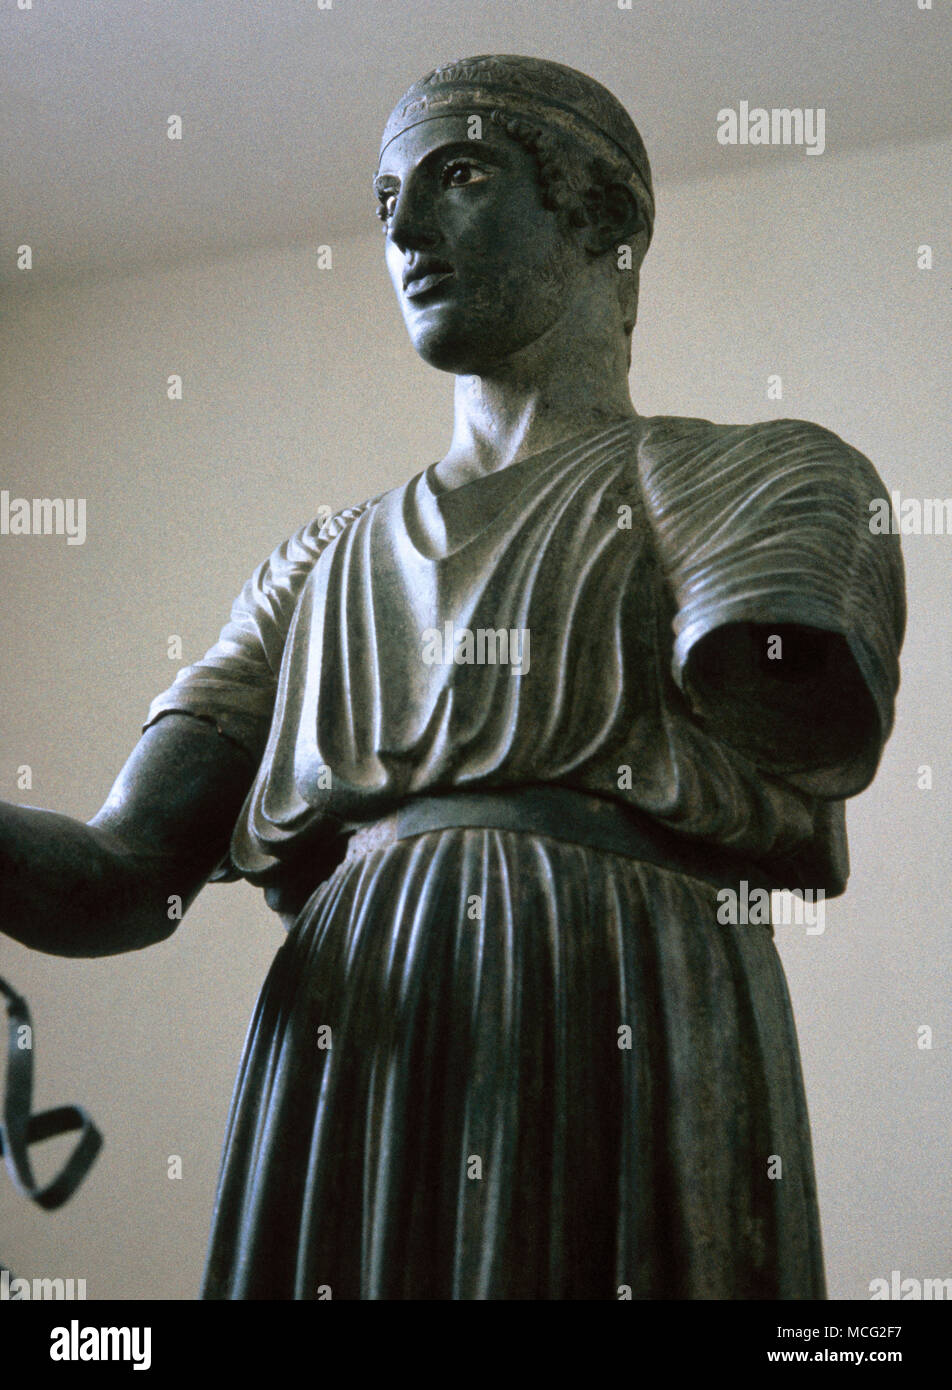 Ancient Greece. Charioteer of Delphi, detail. Cast in bronze sculpture, 470 BC. Driver of the chariot race, found at the Sanctuary of Apollo in Delphi. Archaelogical Museum, Delphi, Greece. Stock Photo